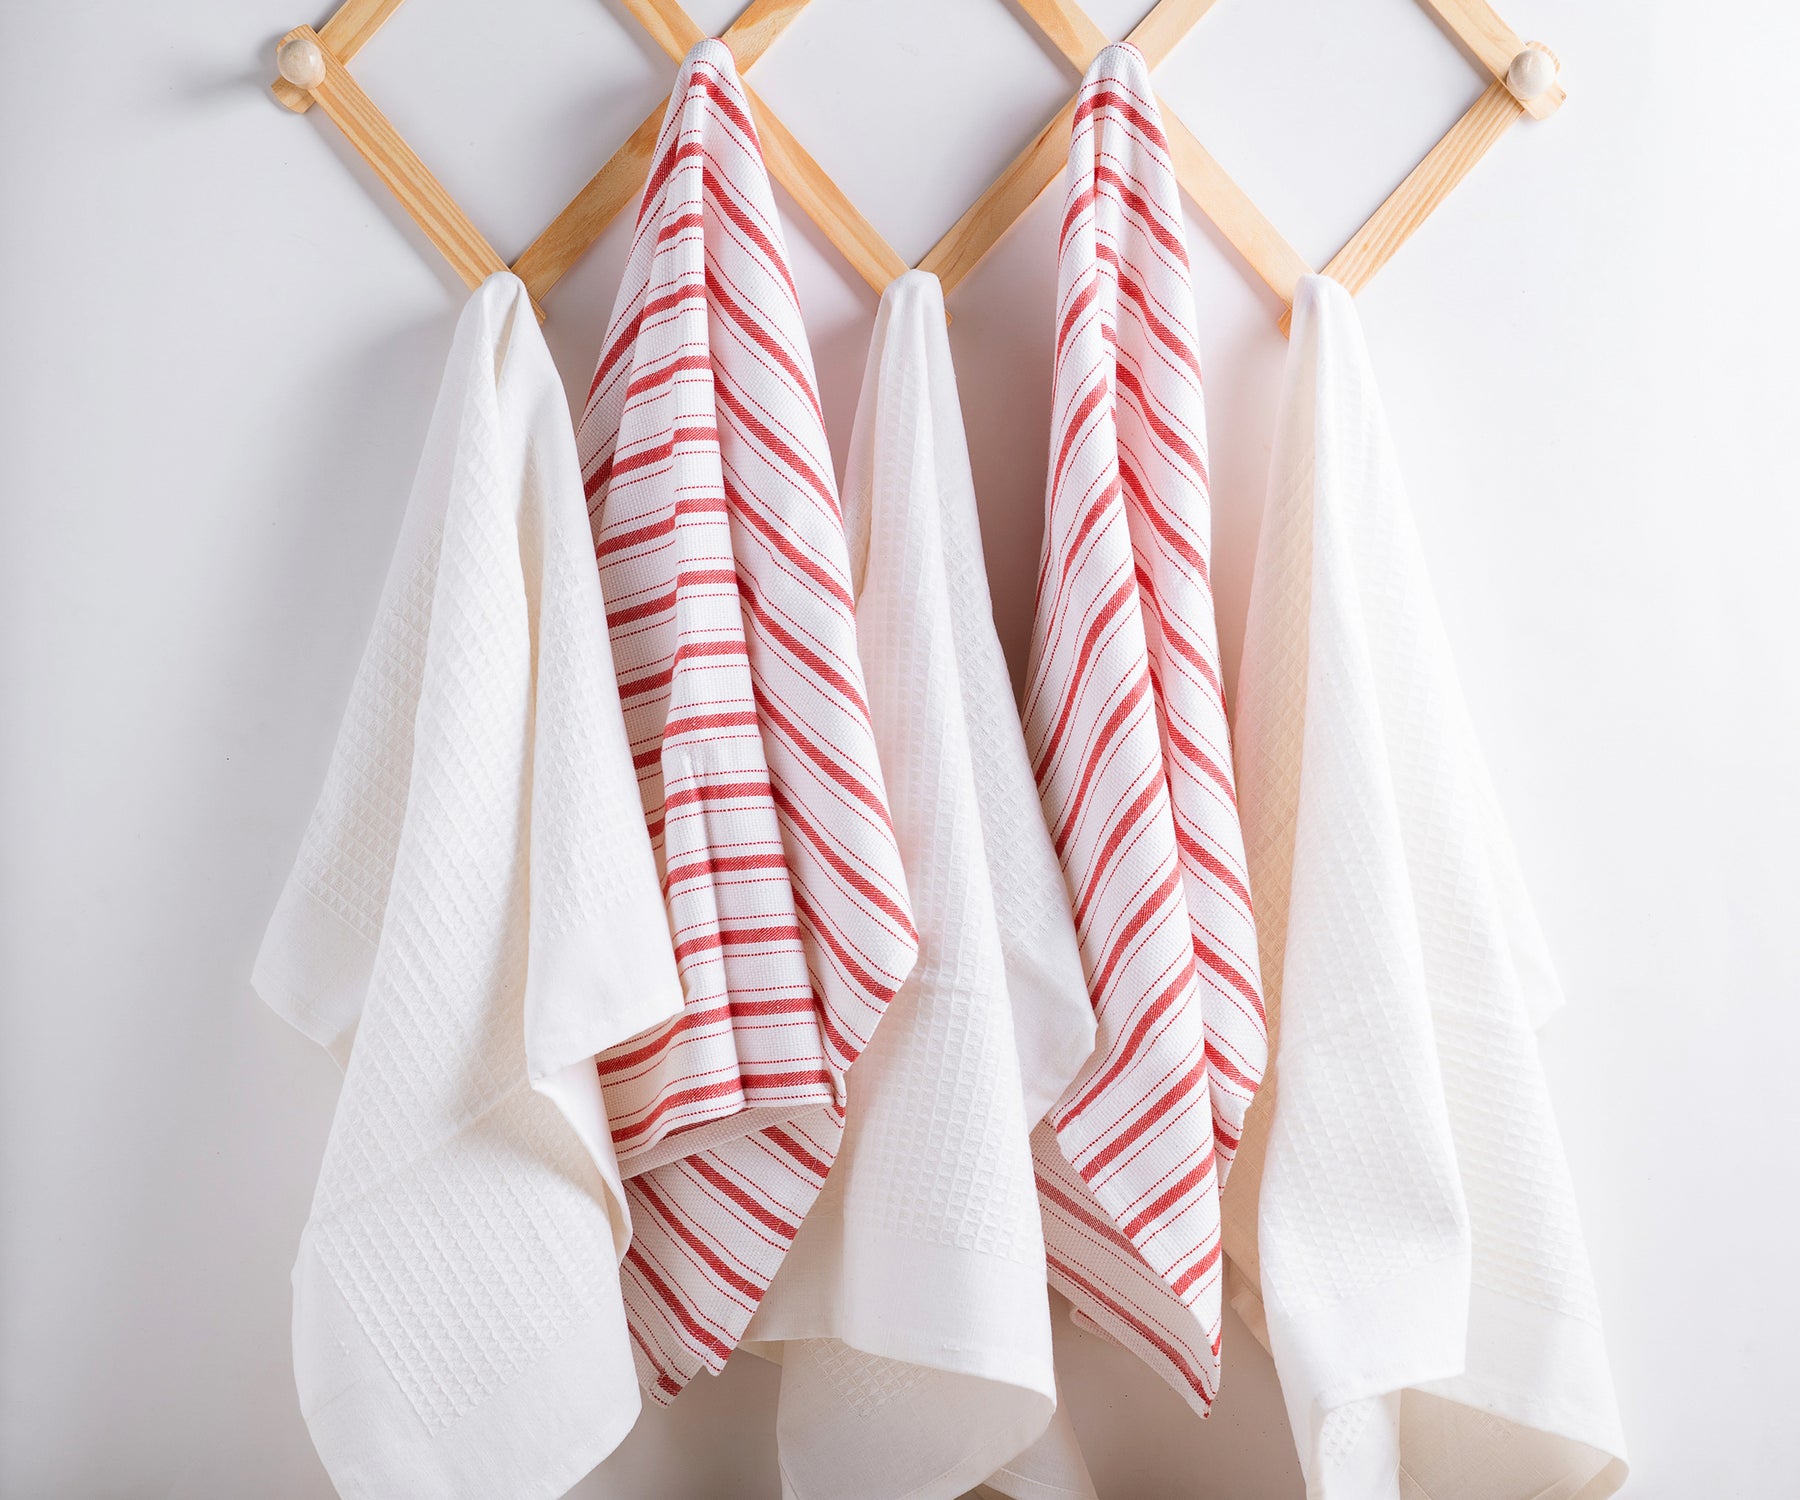 cotton dish towels with hanging loop, red and white kitchen towels cotton, red and white stripe kitchen towels.